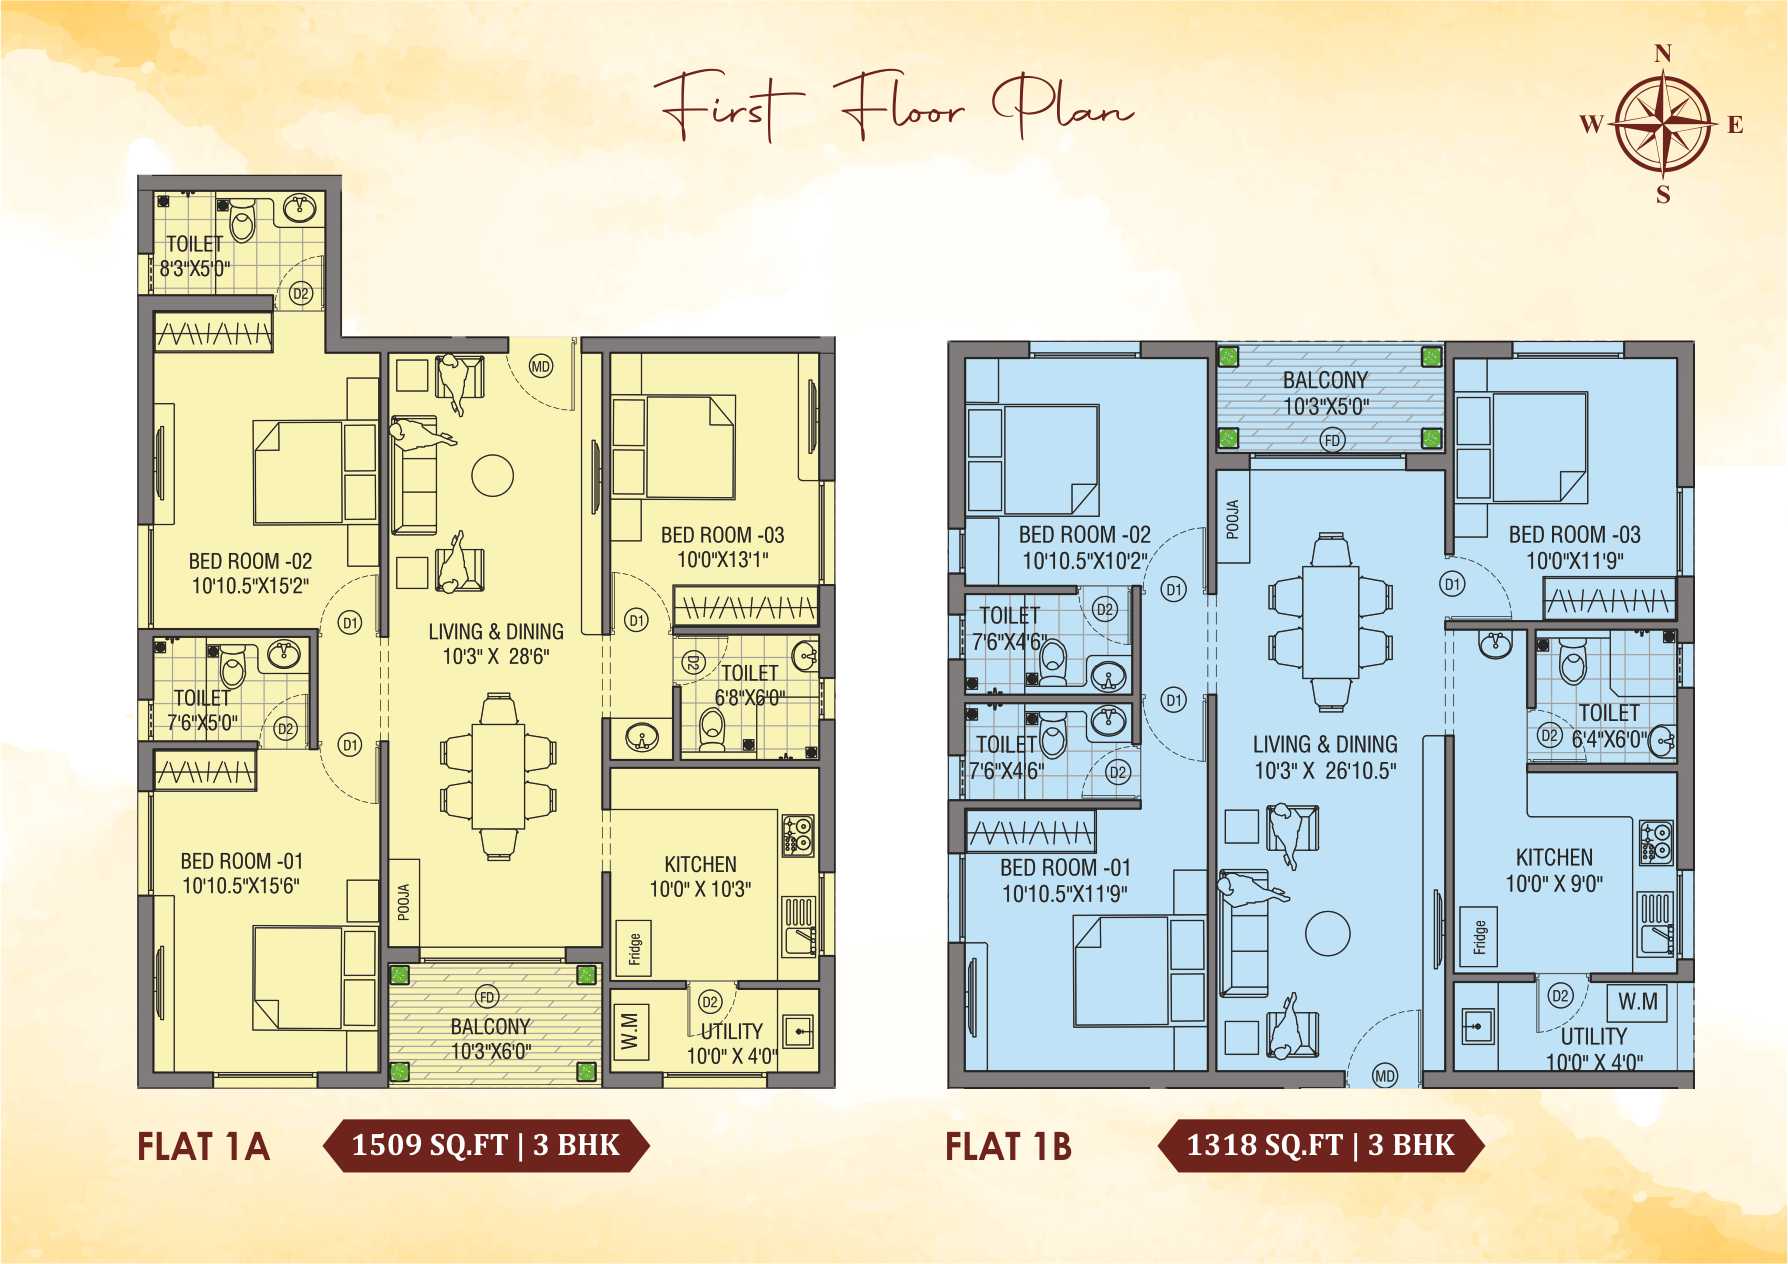 https://www.firmfoundations.in/projects/floorplans/thumbnails/16954467798Thayagam_1st.jpg